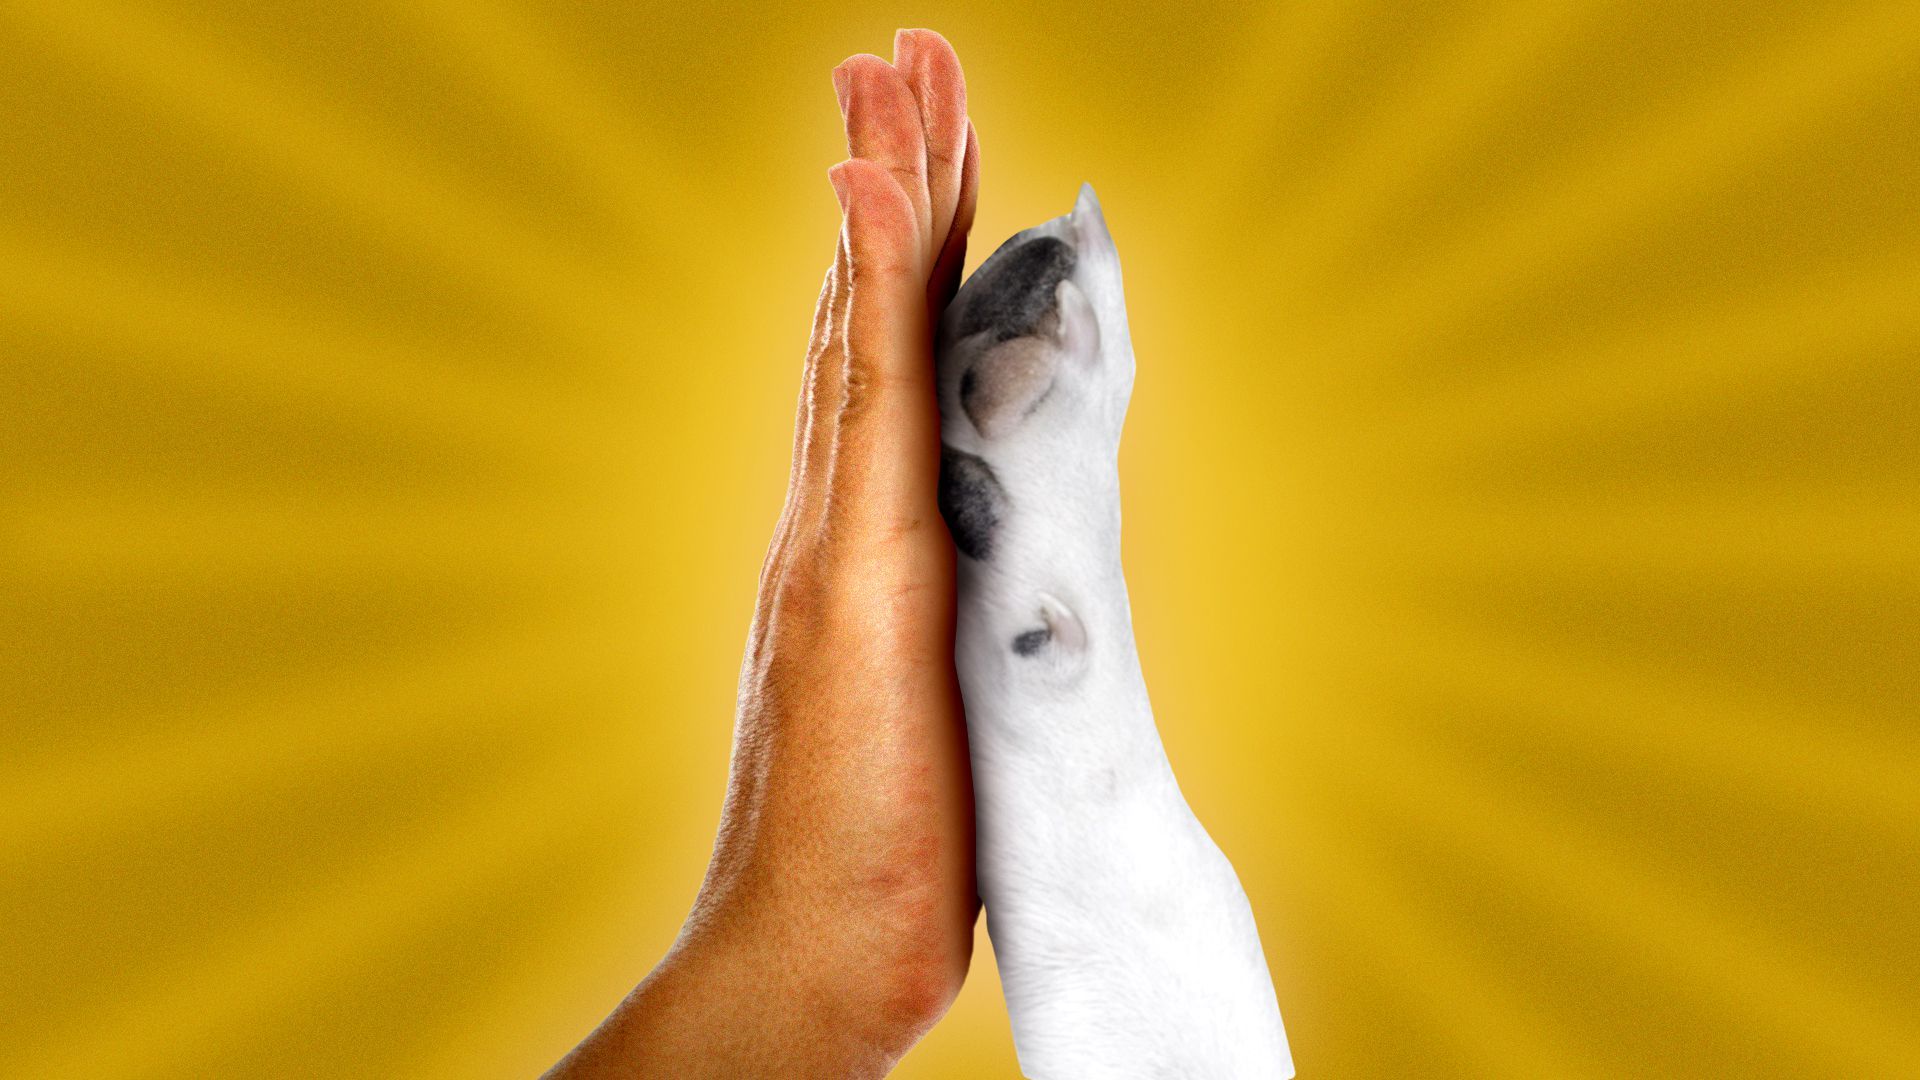 Illustration of a human hand and dog paw high-fiving